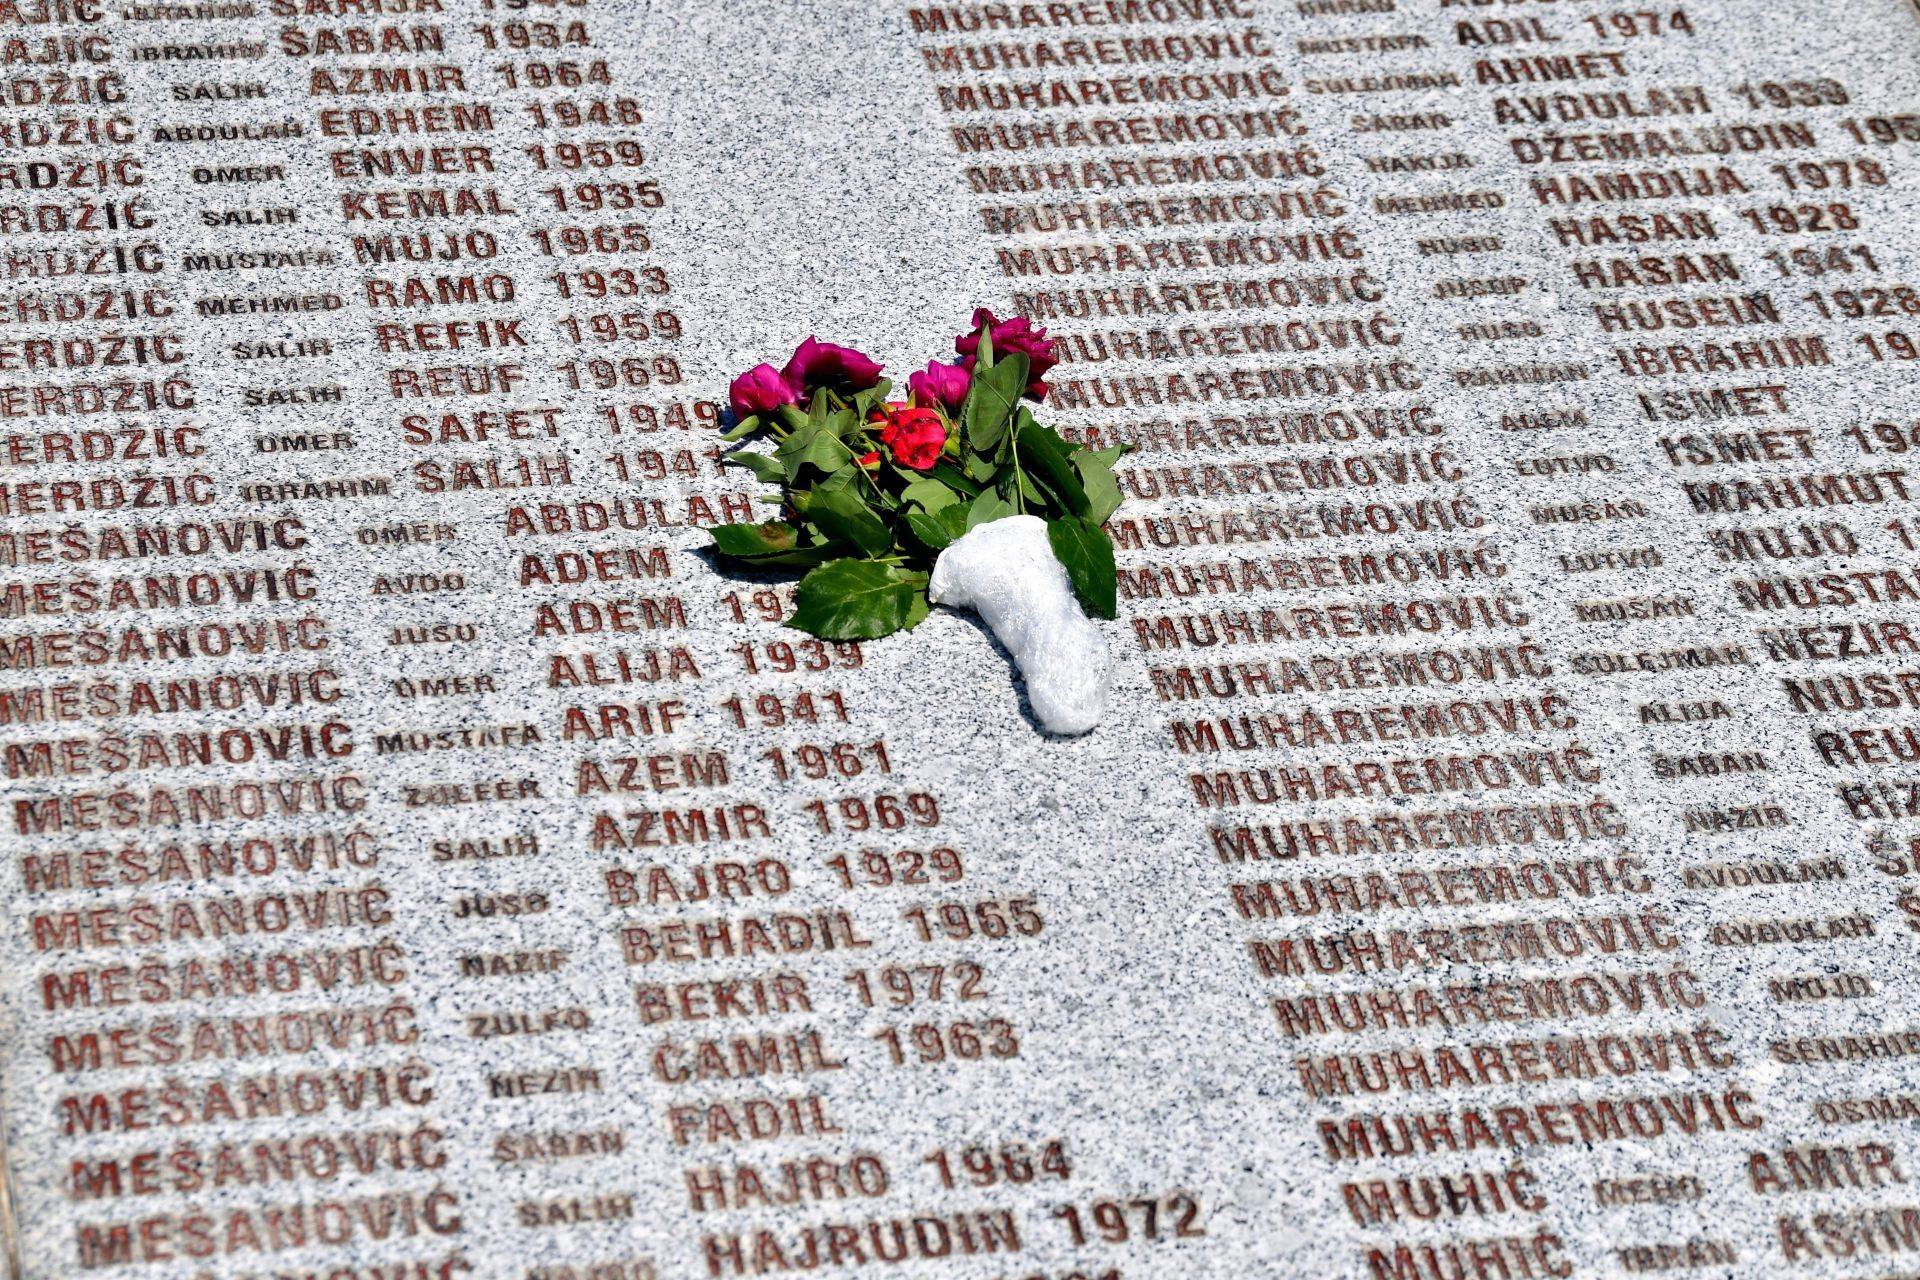 On the Anniversary of Genocide in Bosnia, a Policy Reassessment Is in Order